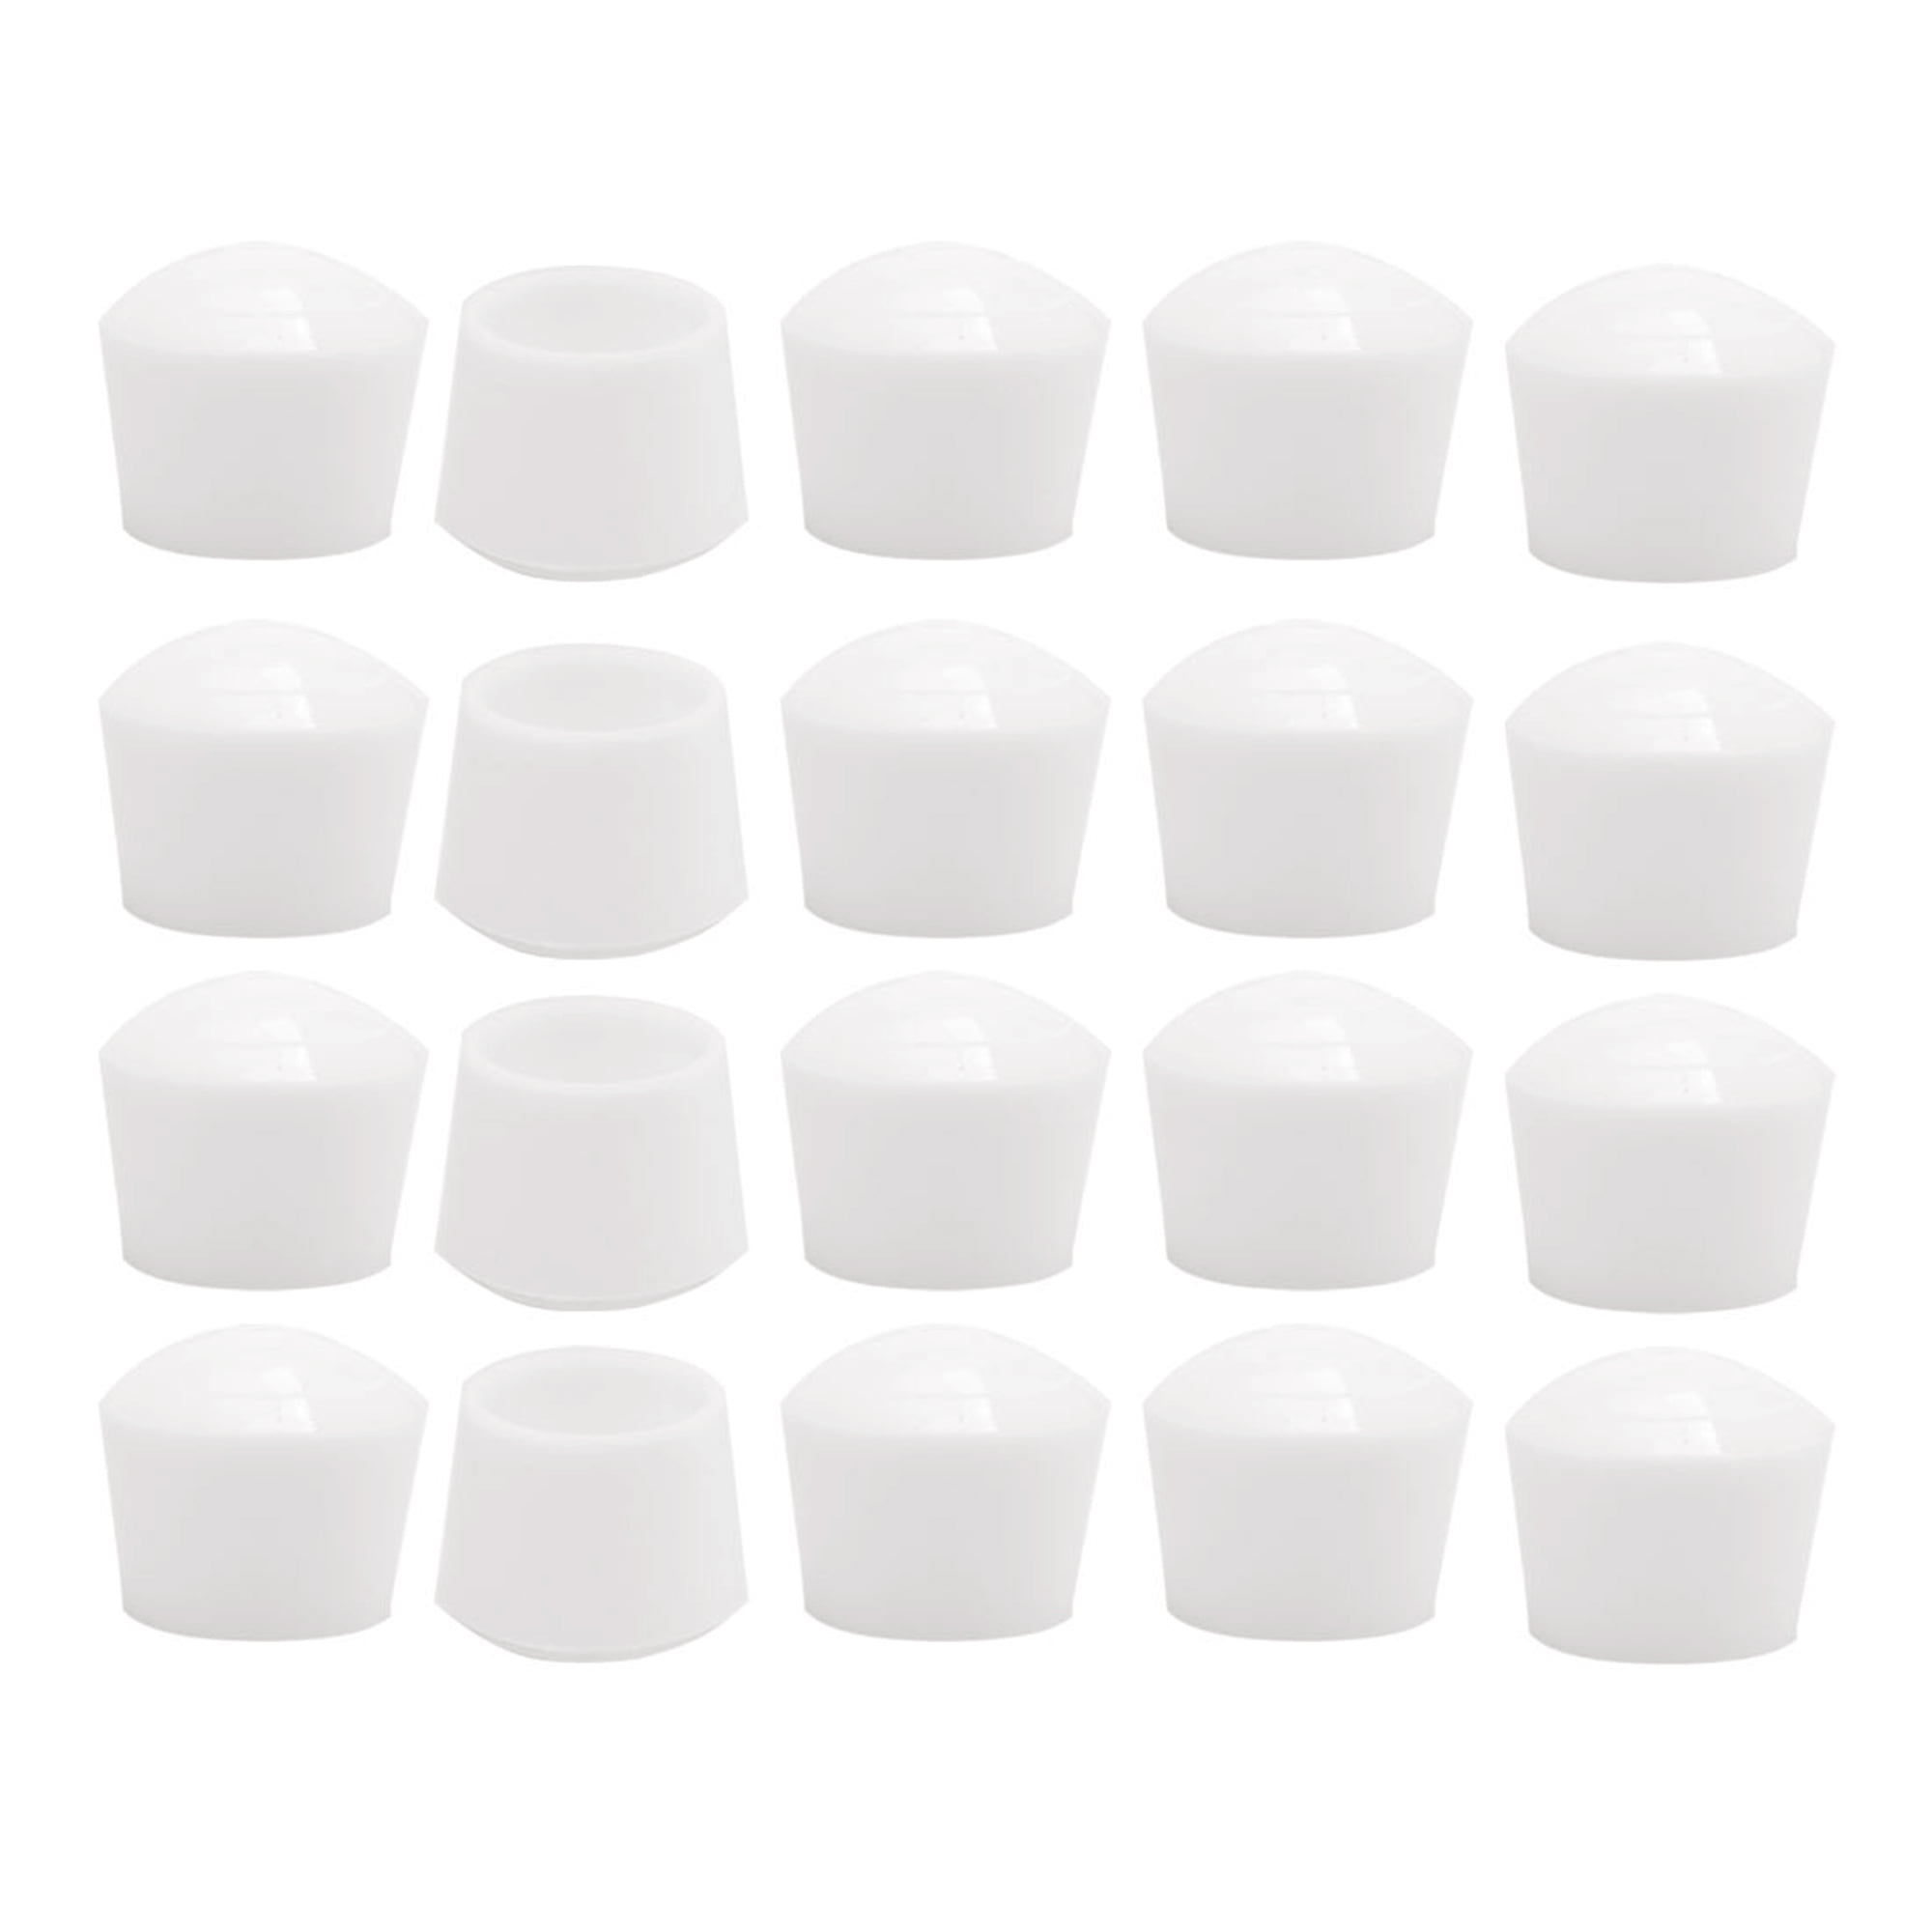 Reduce Noise Prevent Scratch uxcell Clear PVC Chair Leg Caps End Tip Feet Cover Furniture Slider Floor Protector 40pcs 0.79 20mm Inner Diameter 